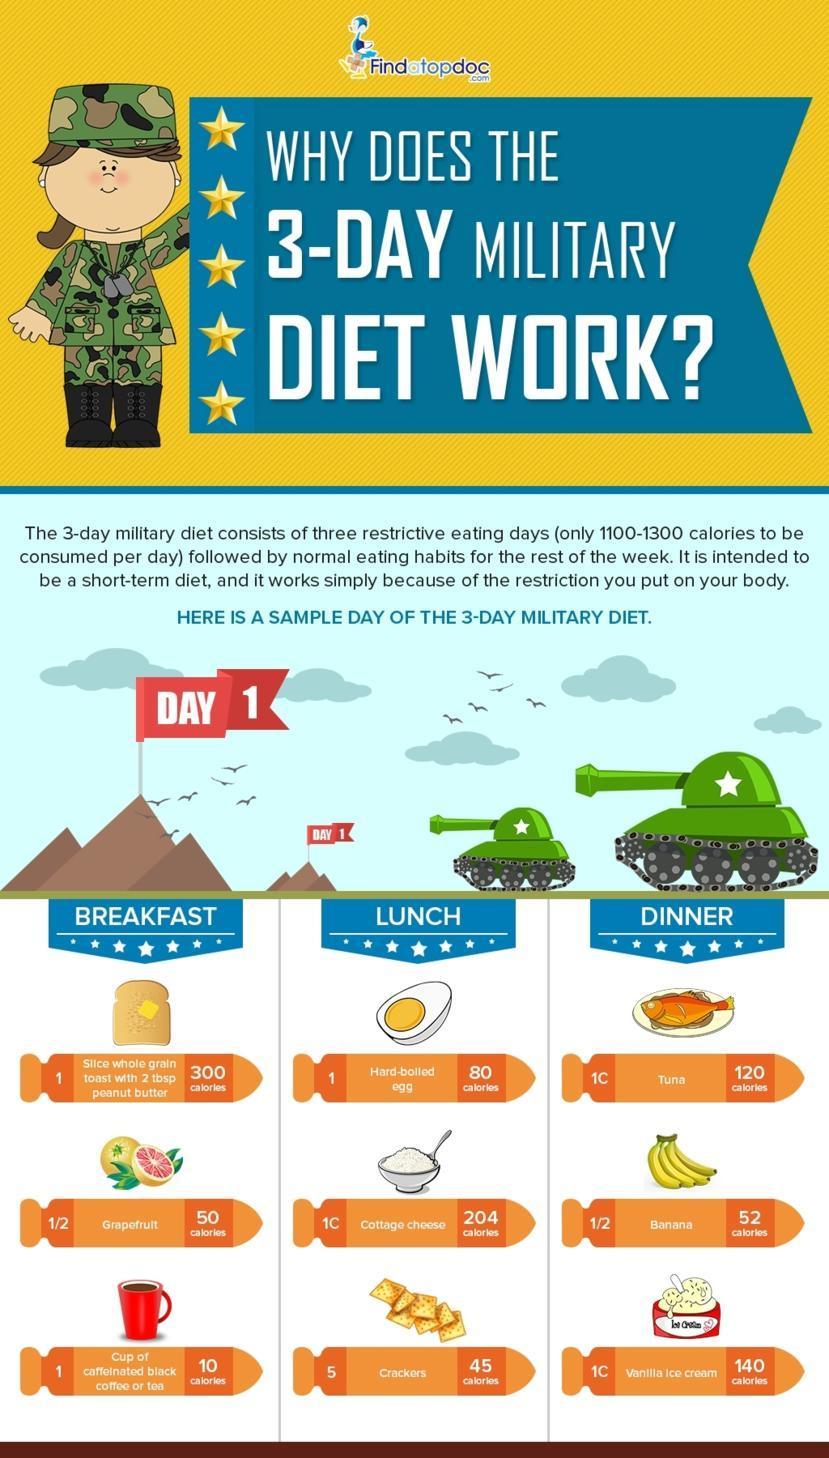 https://www.findatopdoc.com/var/fatd/storage/images/_aliases/article_main/media/images/why-does-the-3-days-military-diet-work/488789-1-eng-US/Why-does-the-3-days-Military-Diet-Work.jpg